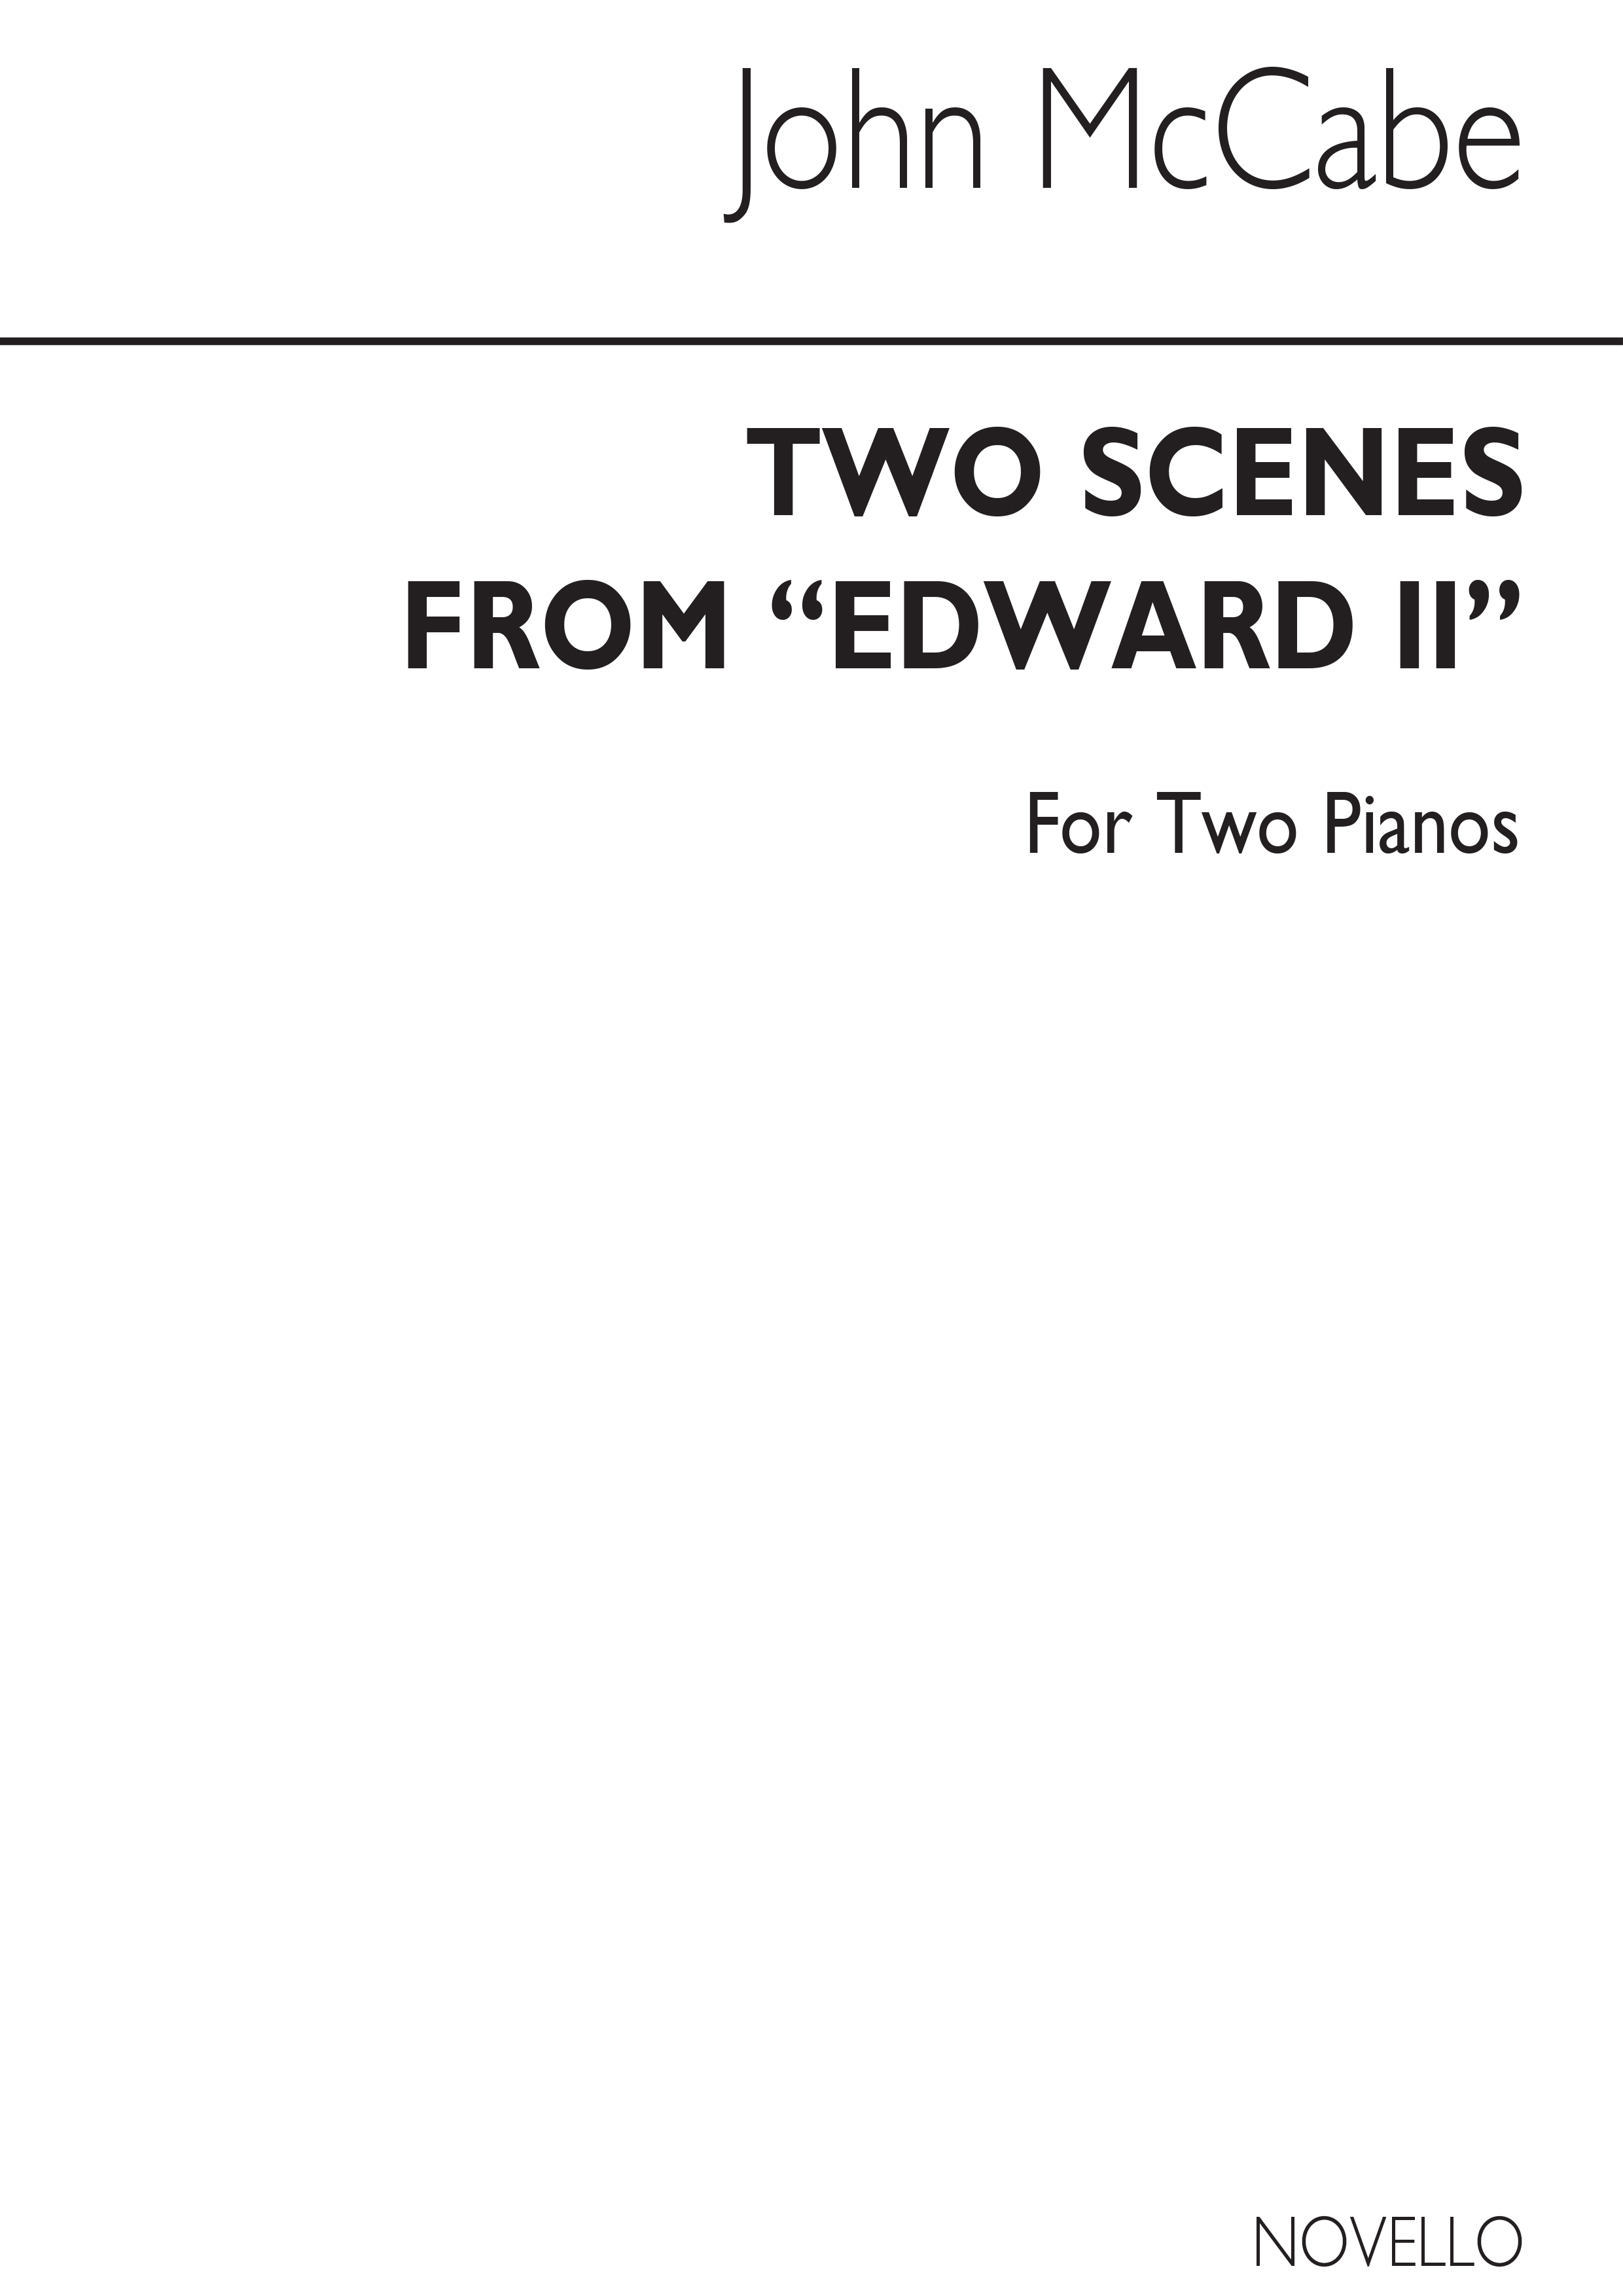 John McCabe: Two Scenes From Edward II (Two Pianos)